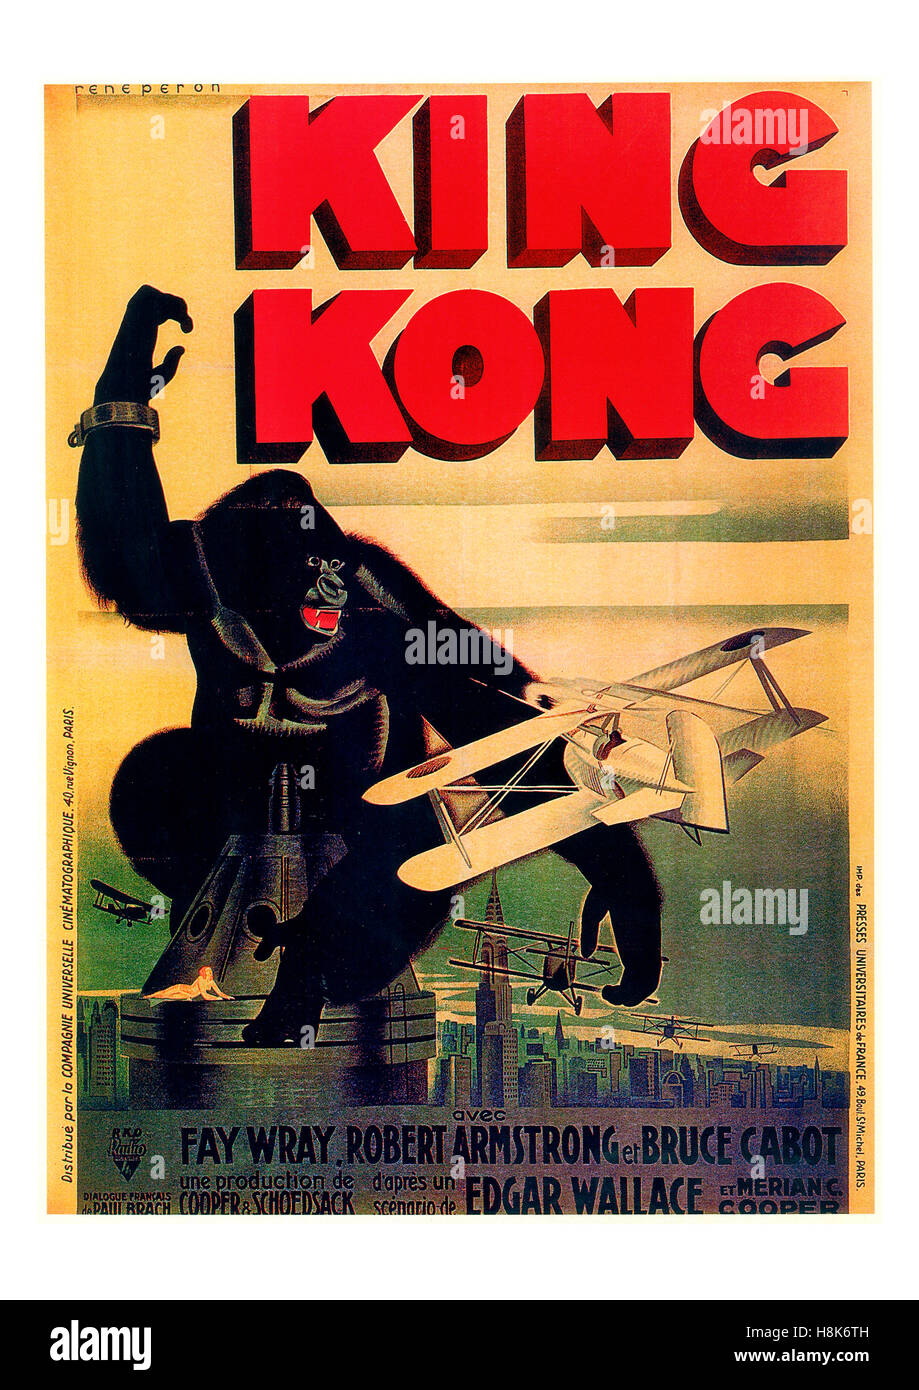 Vintage movie poster for King Kong starring Fay Wray and Robert Armstrong Stock Photo